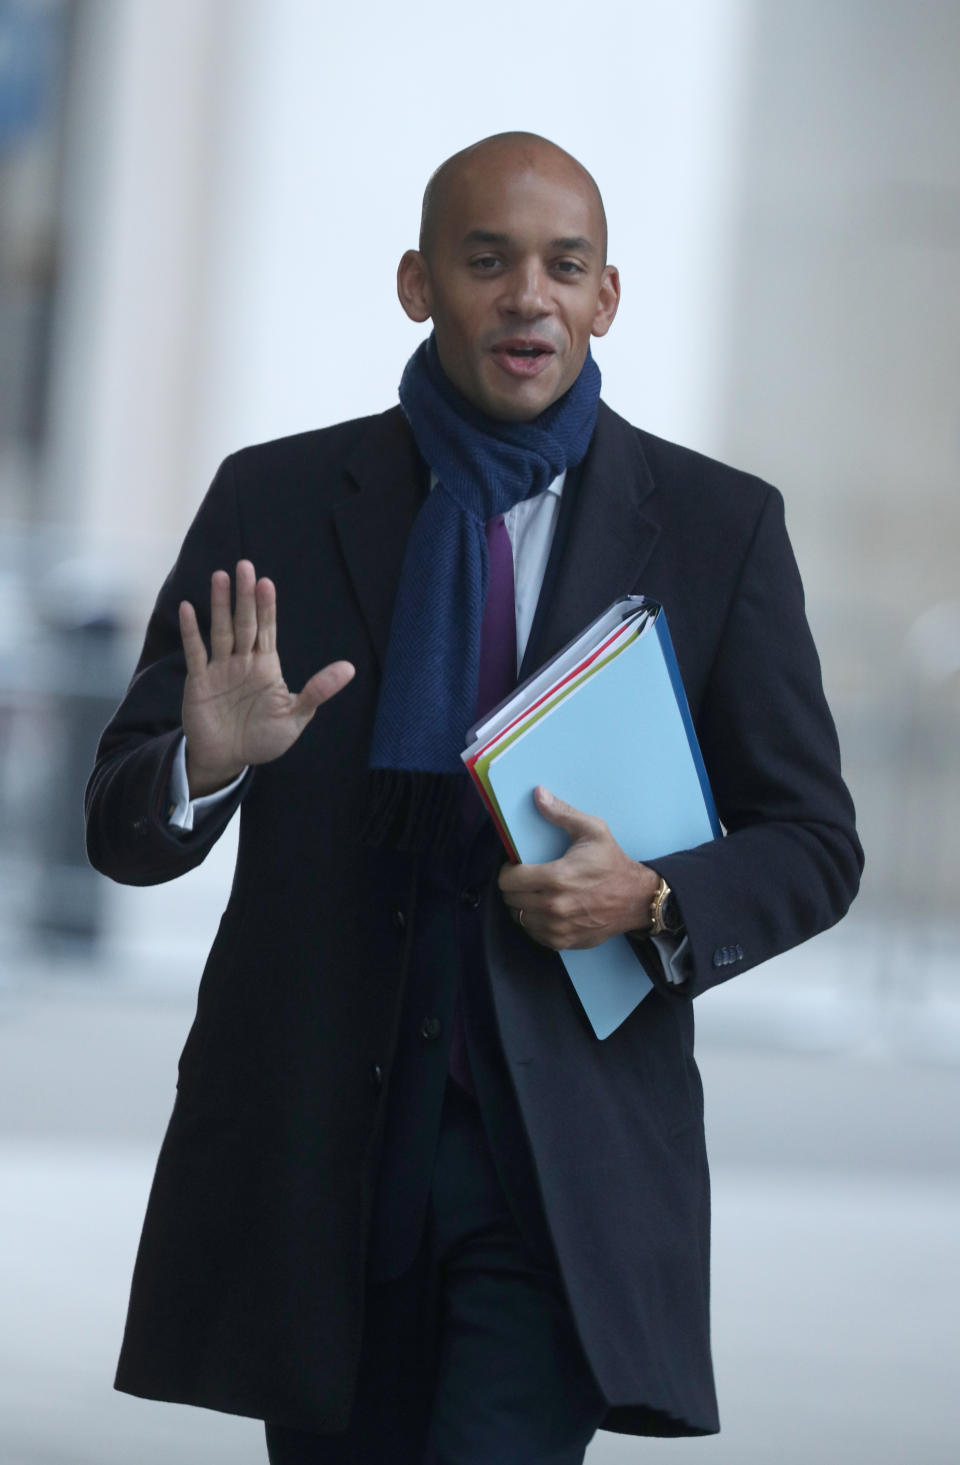 Liberal Democrat candidate Chuka Umunna arrives at Broadcasting House, London to appear on The Andrew Marr Show.